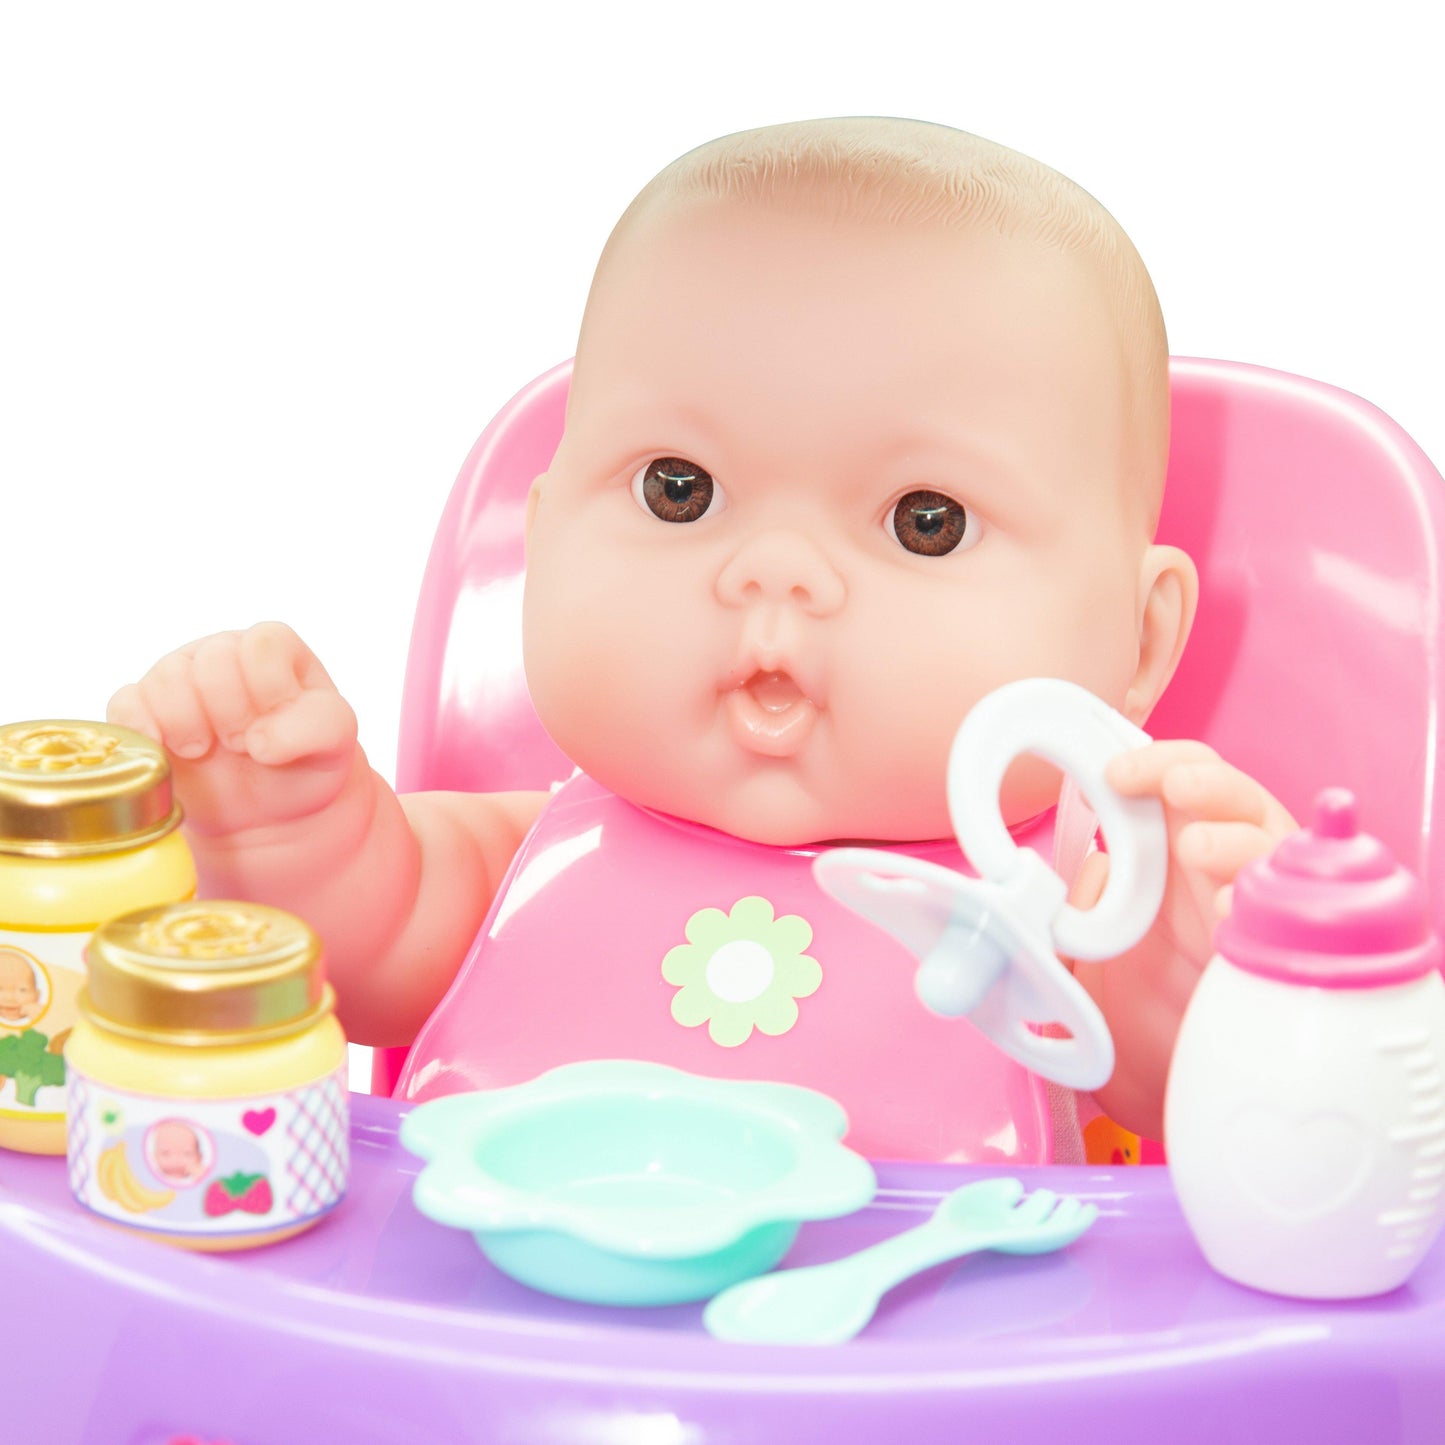 JC Toys, Lots to Love Babies 14 inches Baby Doll with High Chair and Accessories - JC Toys Group Inc.